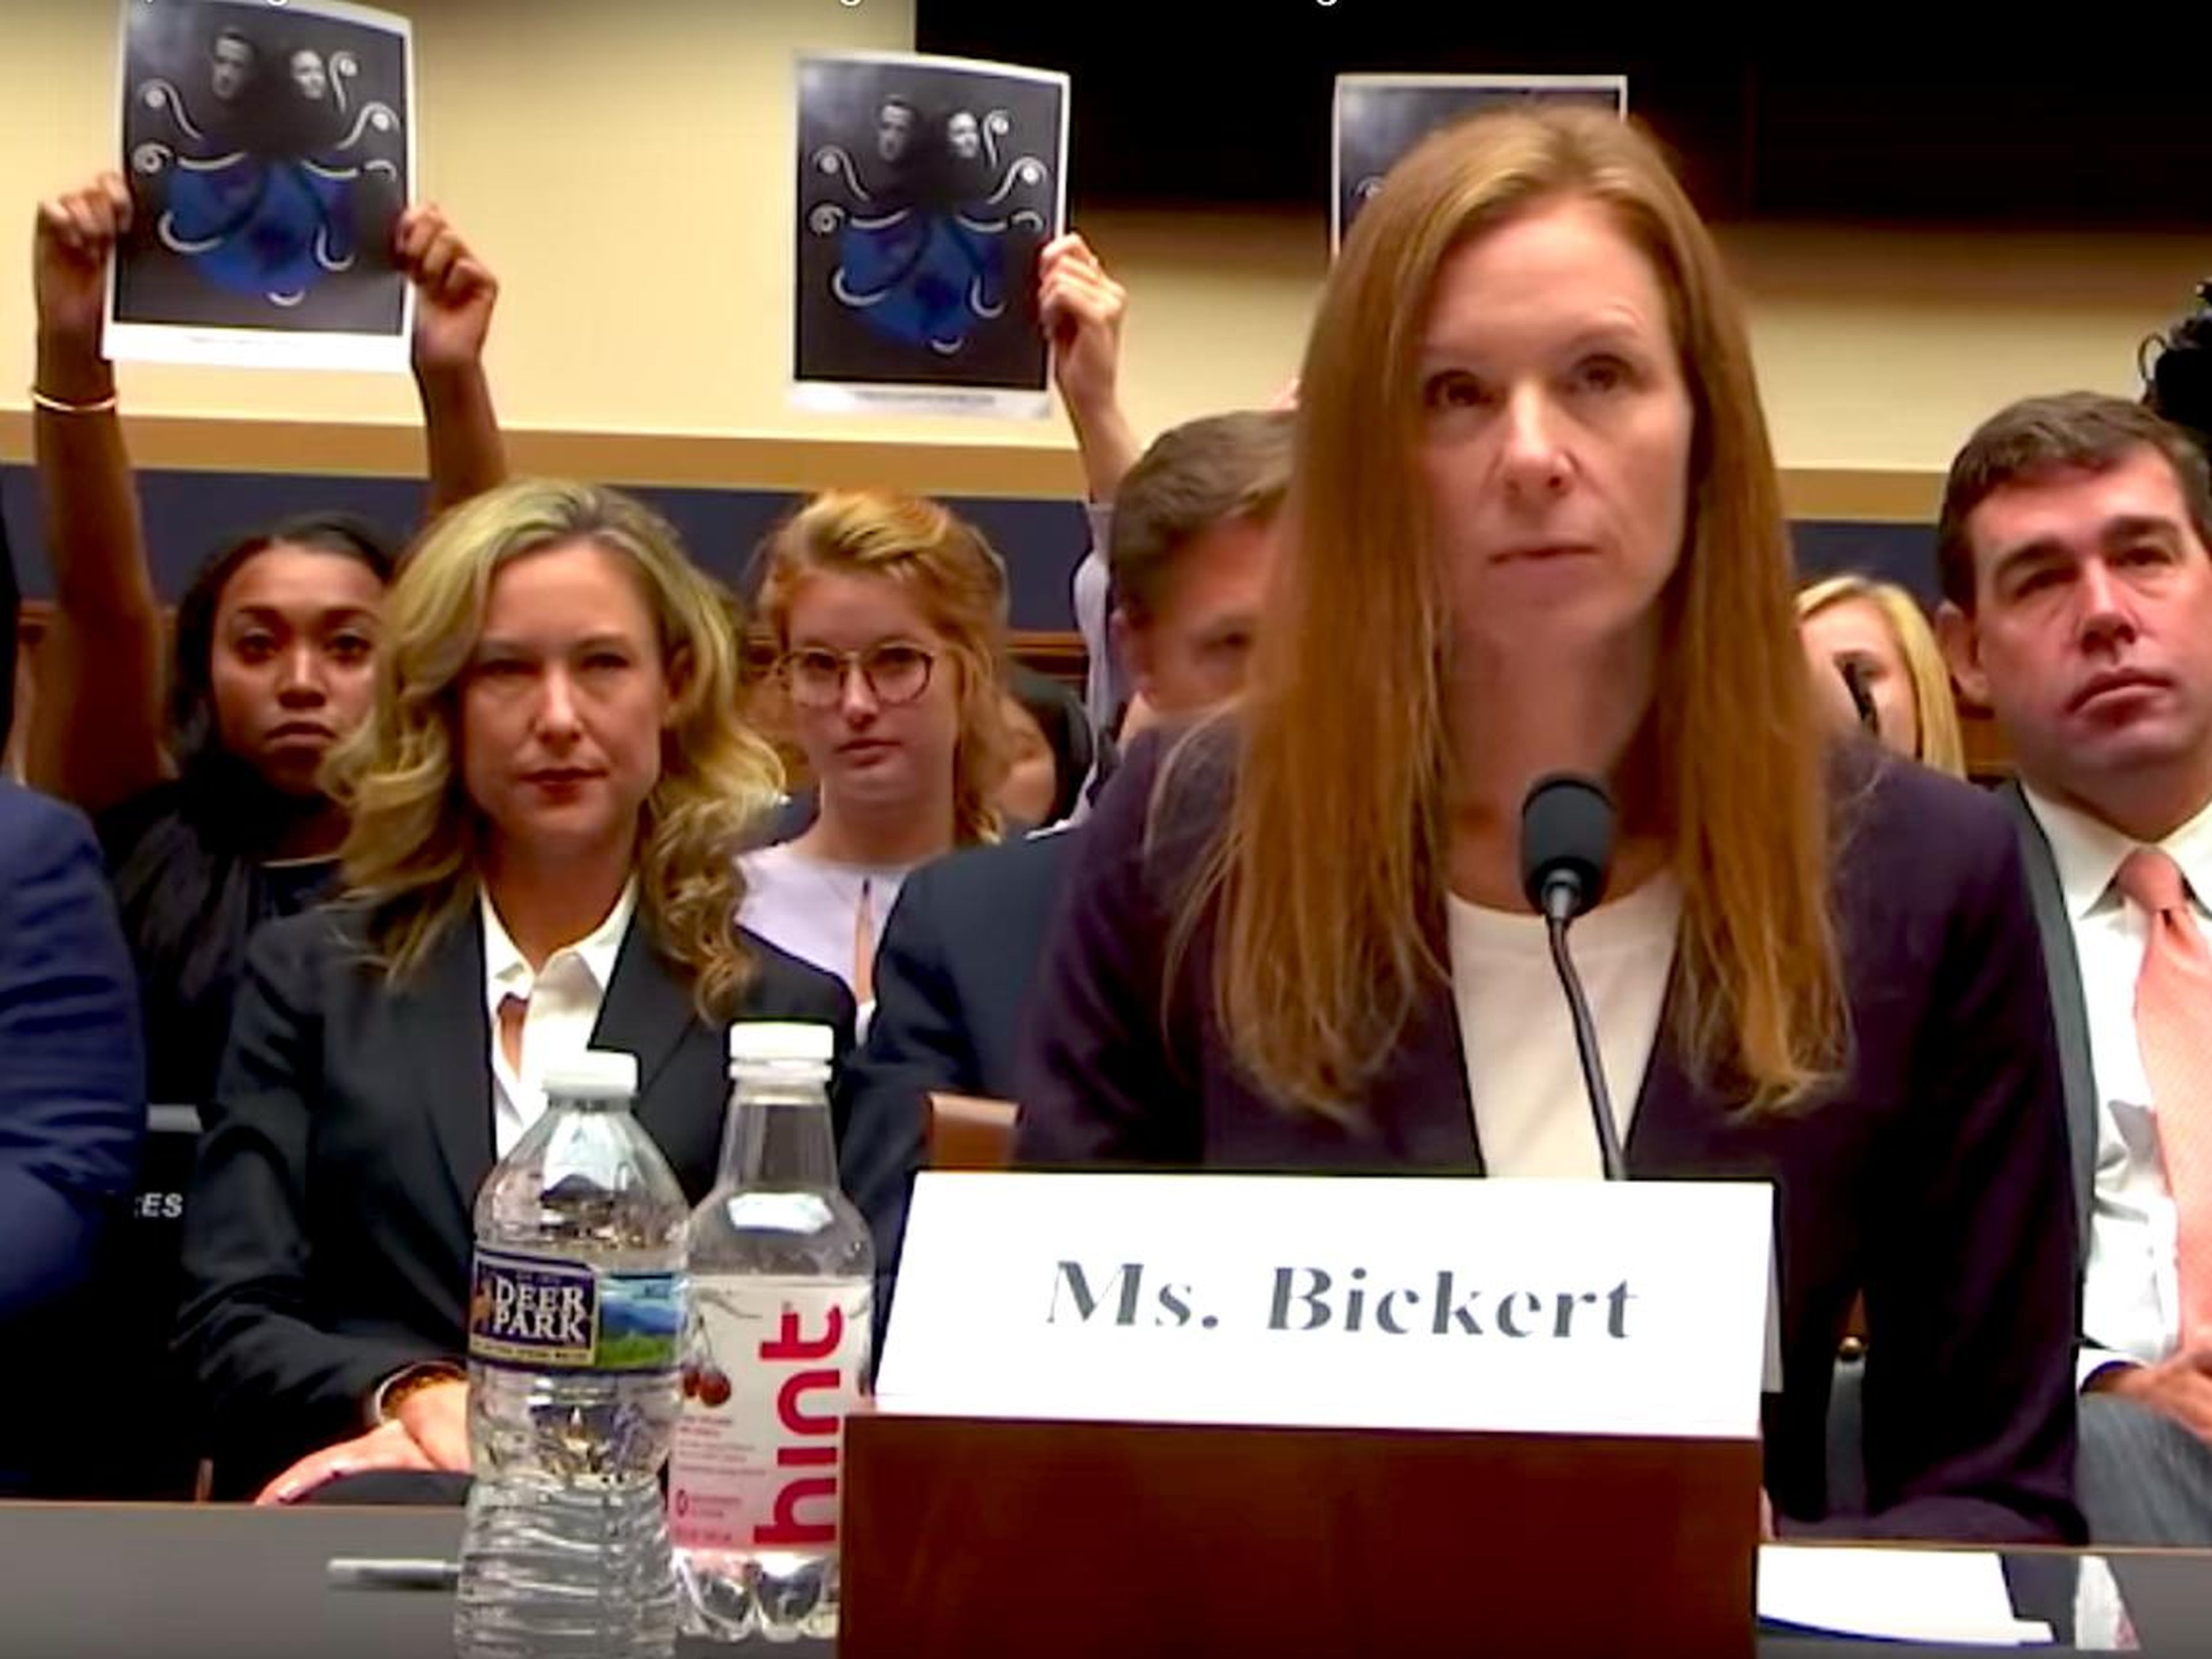 Facebook's Monika Bickert gives evidence to the House Judiciary Committee.